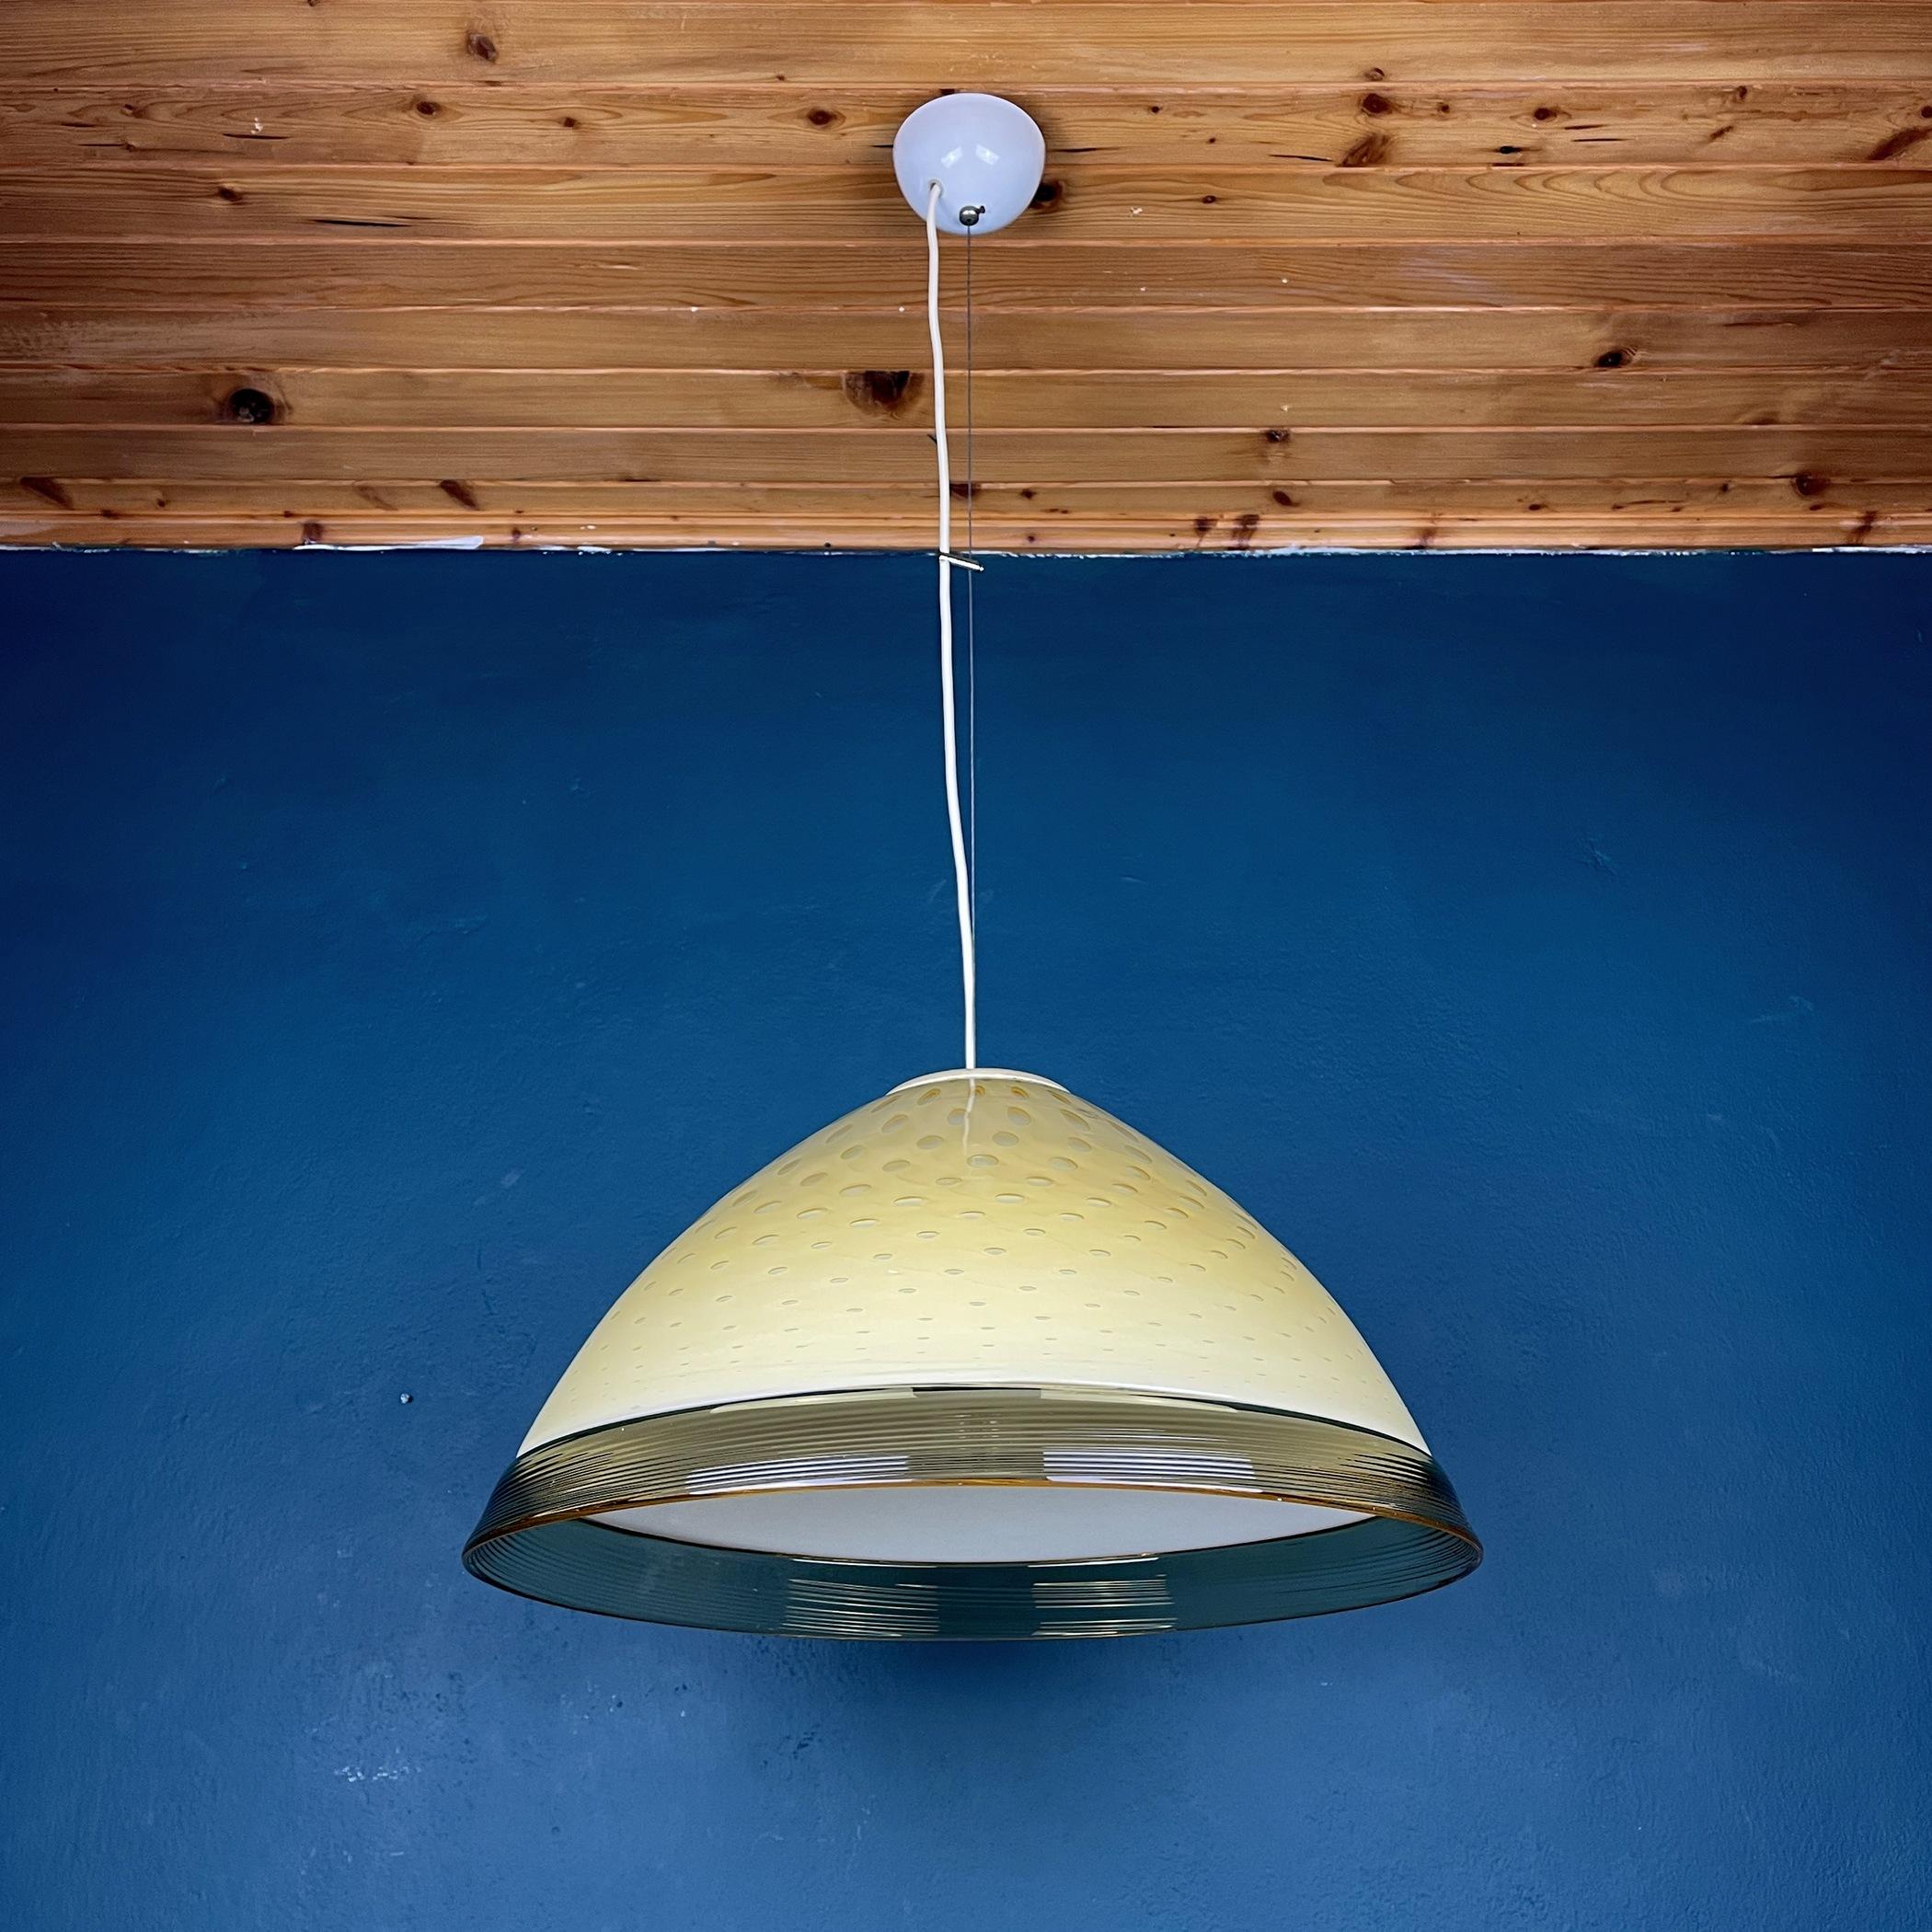 Mid-century yellow Murano glass pendant lamp Vetri Murano Venezia Italy 1970s. A hand-blown Murano lamp is a real work of art.
Excellent vintage condition! Max height with cable 95 cm. Chandelier weight 5.5 kg. Bulb E 27 required. Suitable for all